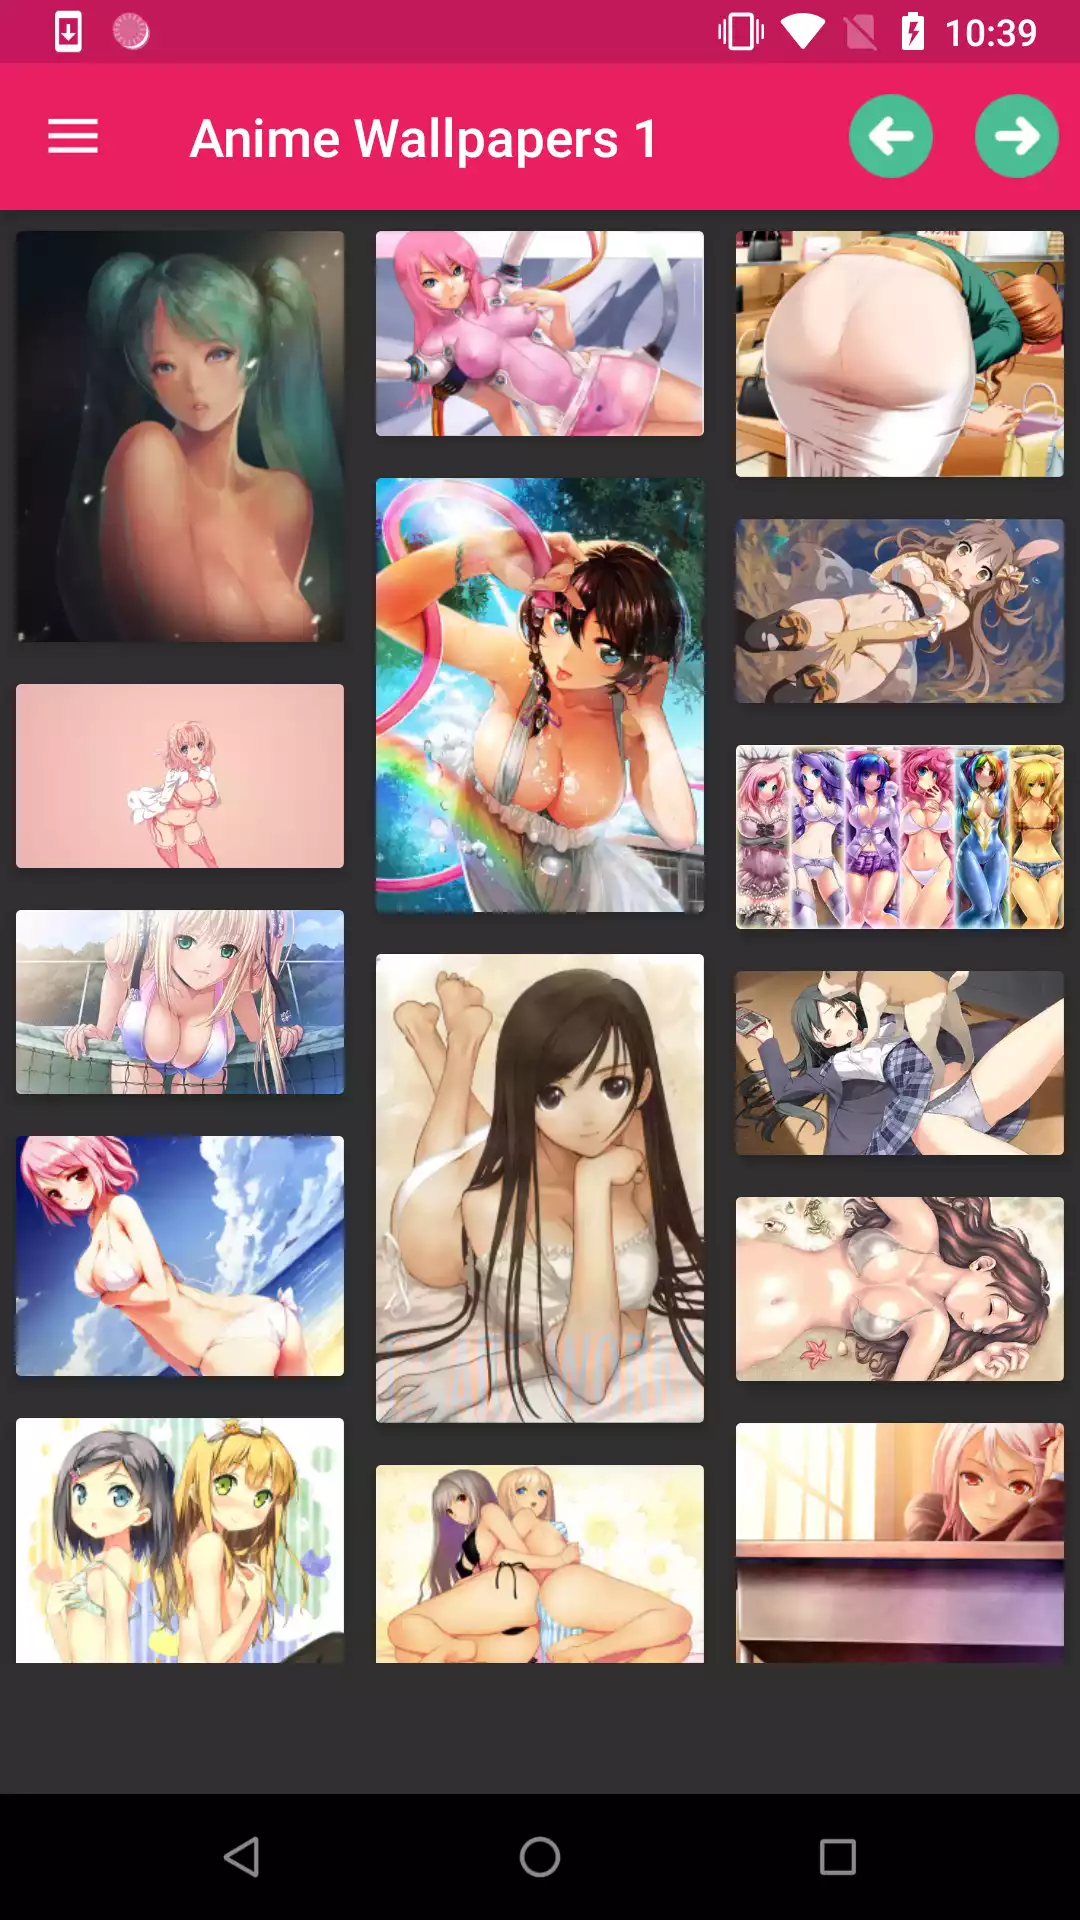 Sexy Anime Girls Wallpapers puzzle,apk,wallpaper,porn,wallpapers,anime,topless,girls,android,sexy,app,hentai,henti,sissy,download,pics,and,apps,erotic,hot,star,panties,offline,backgrounds,pornstarphoto